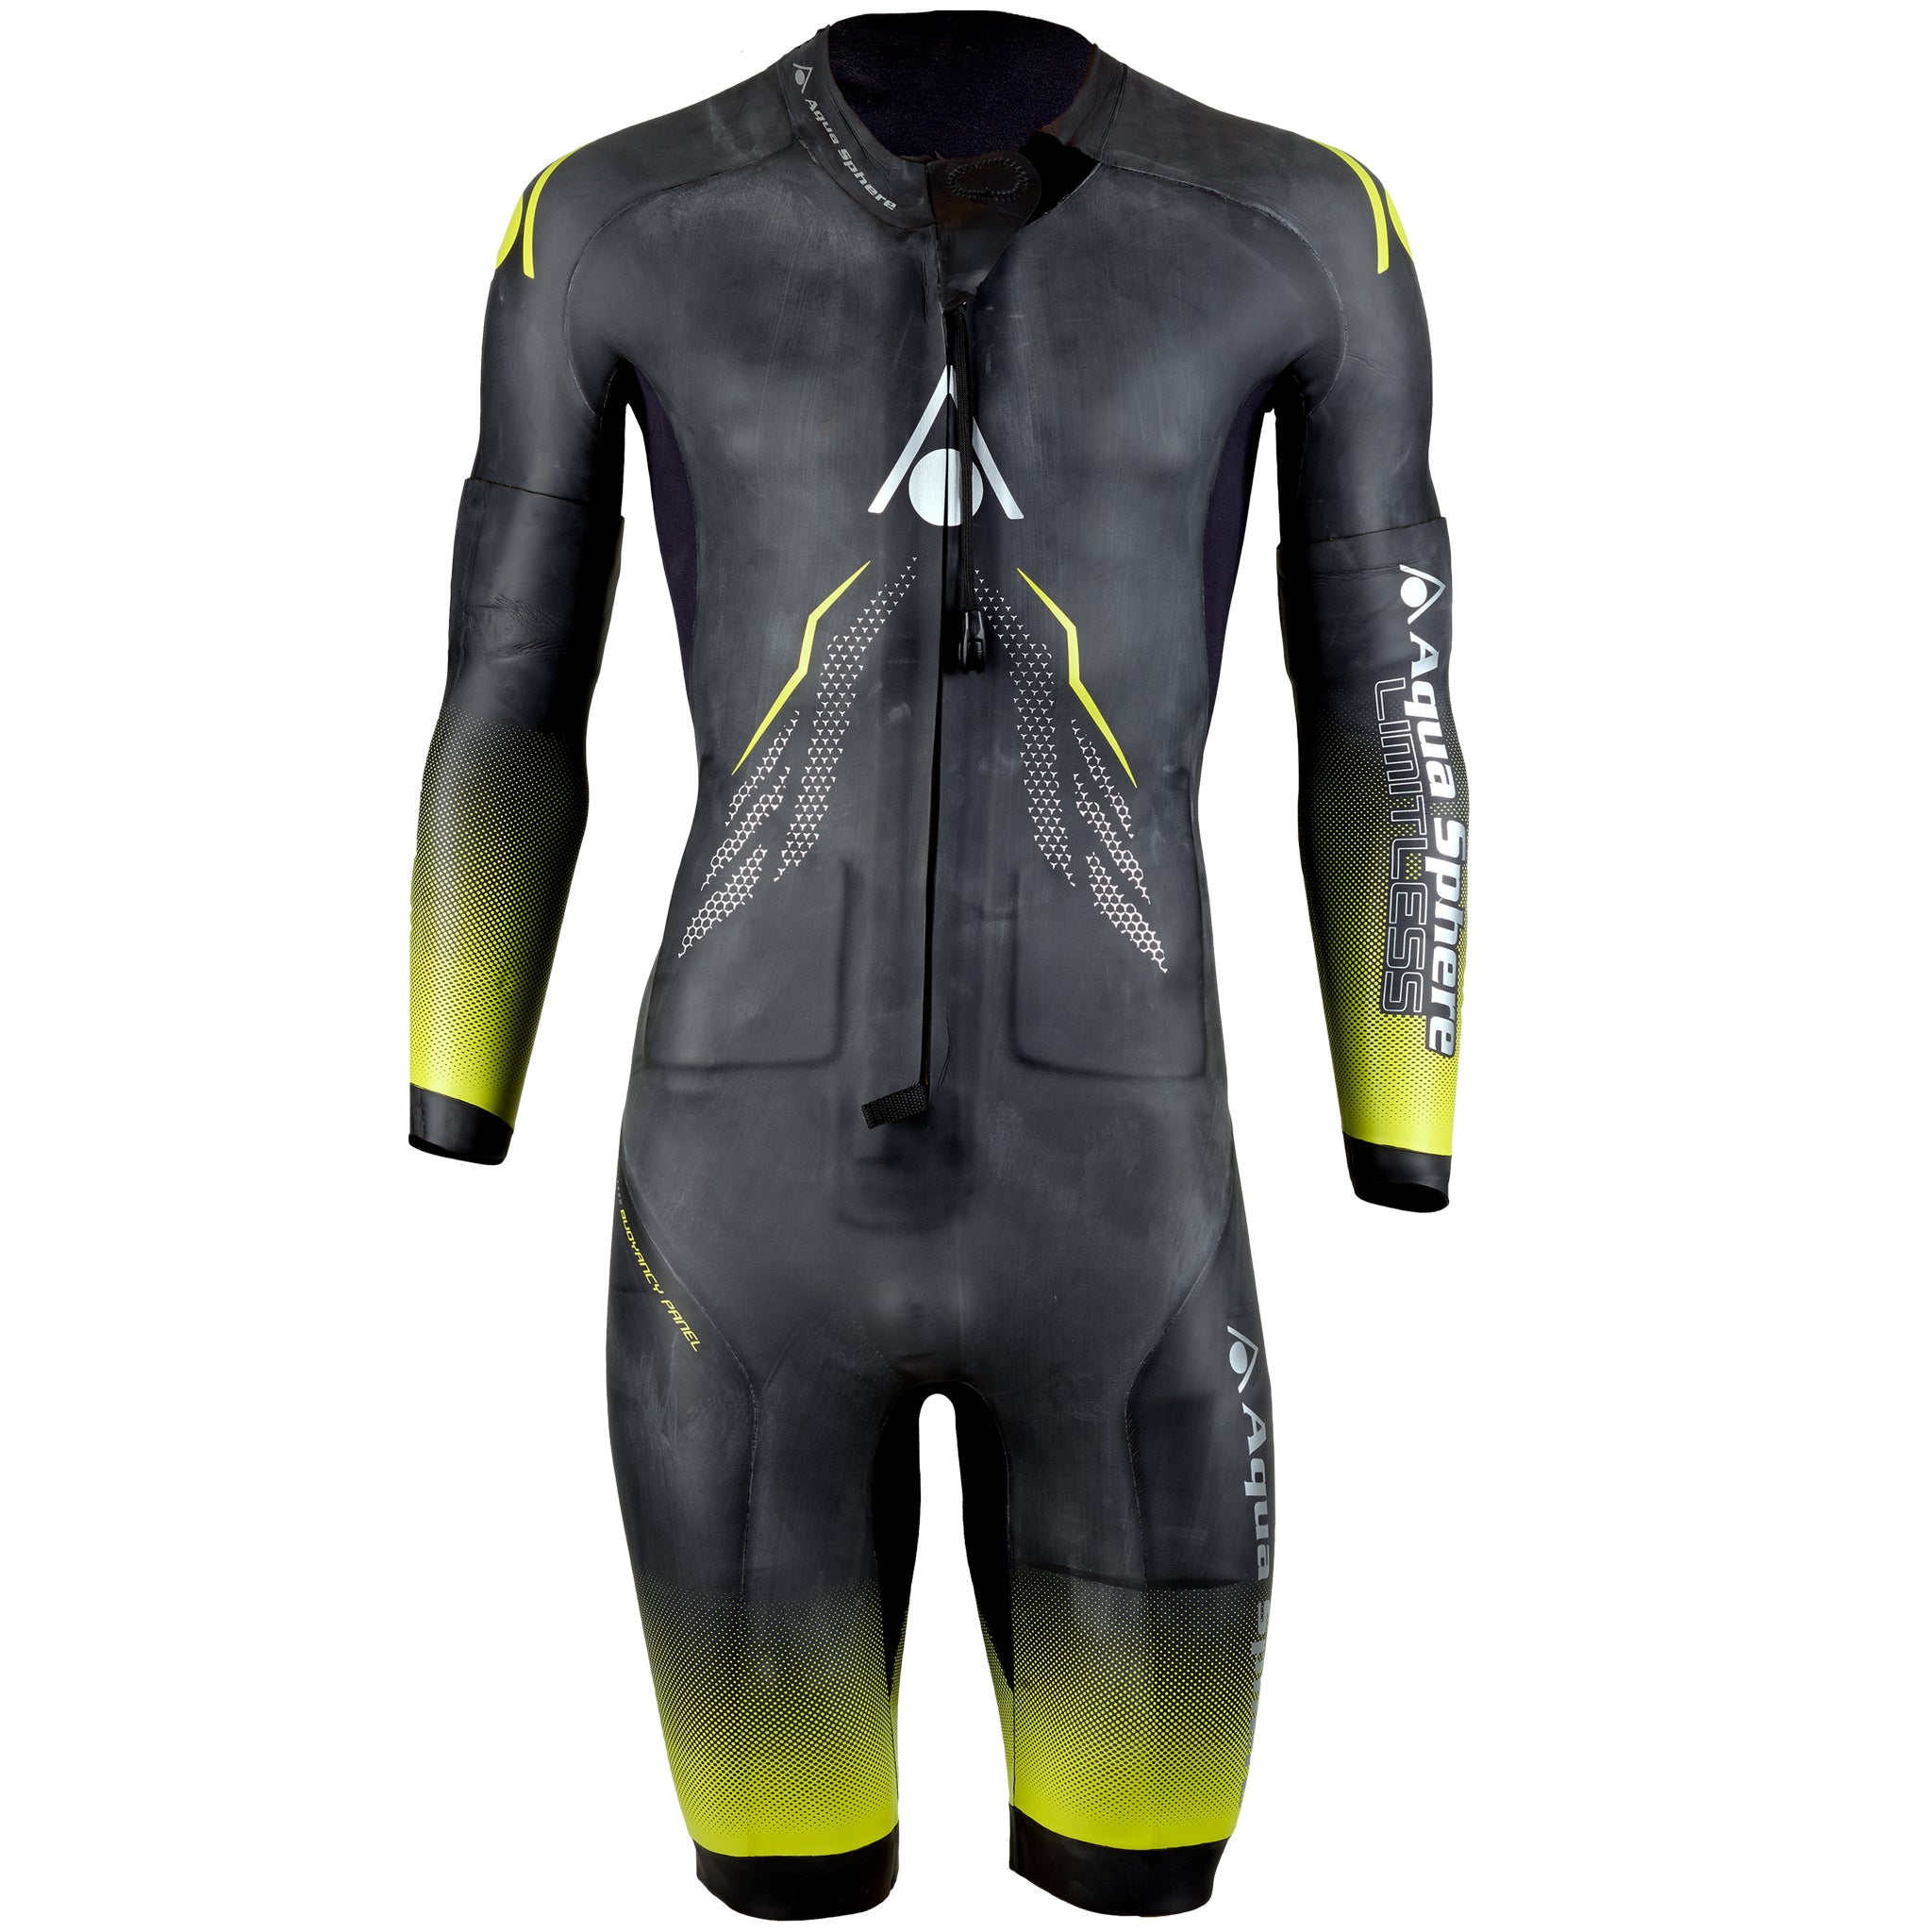 Aqua Sphere Limitless SwimRun Wetsuit with Sleeves Attached